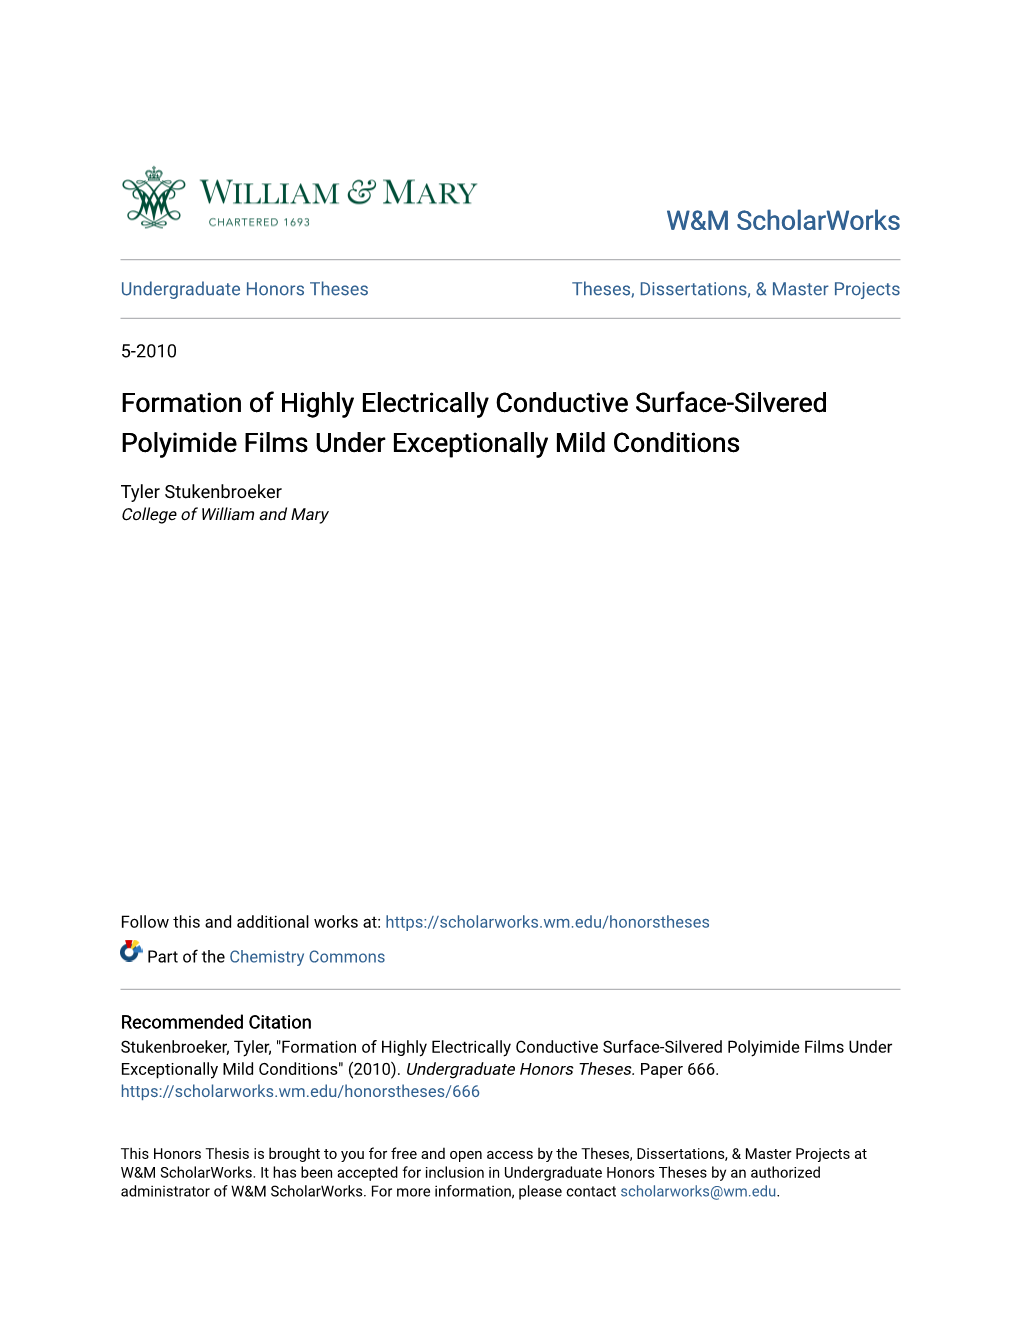 Formation of Highly Electrically Conductive Surface-Silvered Polyimide Films Under Exceptionally Mild Conditions